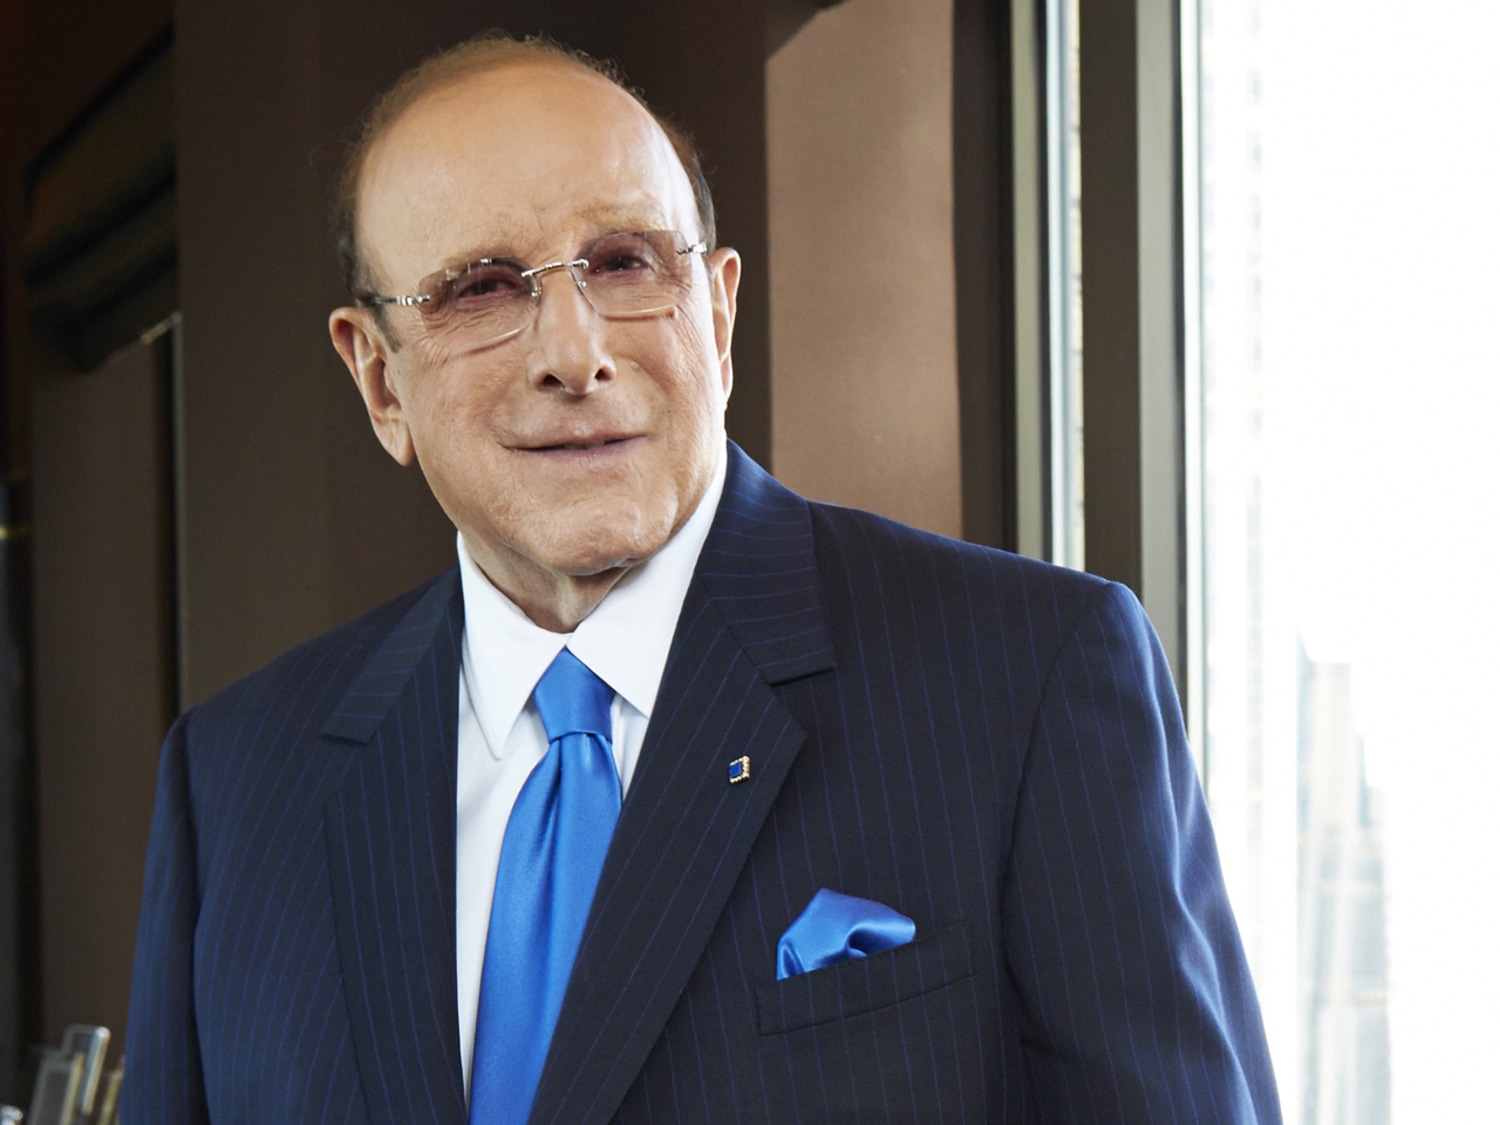 How long has clive davis been in a relationship?